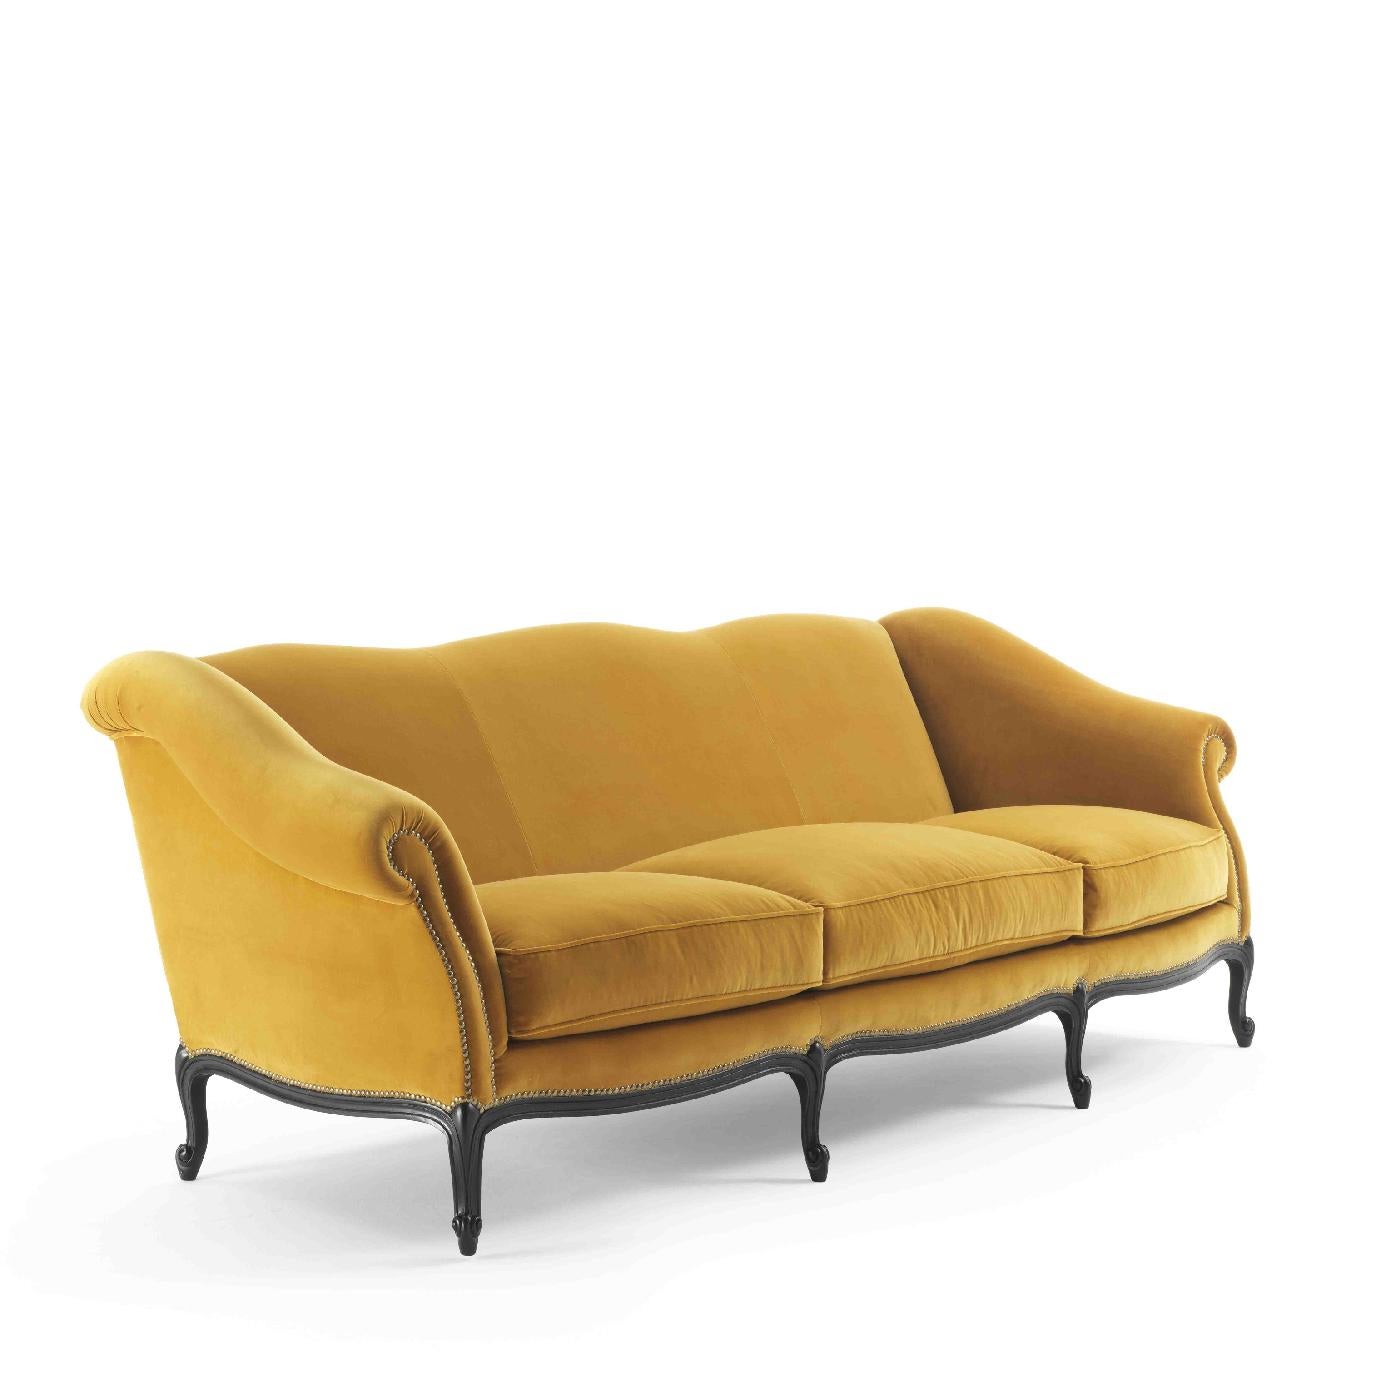 A design that will stand out in any decor, the sofa's sinuous silhouette offers real comfort and elegant style. The plush ocher upholstery (FA808 Cat. B) is accented with satin brass nails along the profile of the arms and undulated base with six